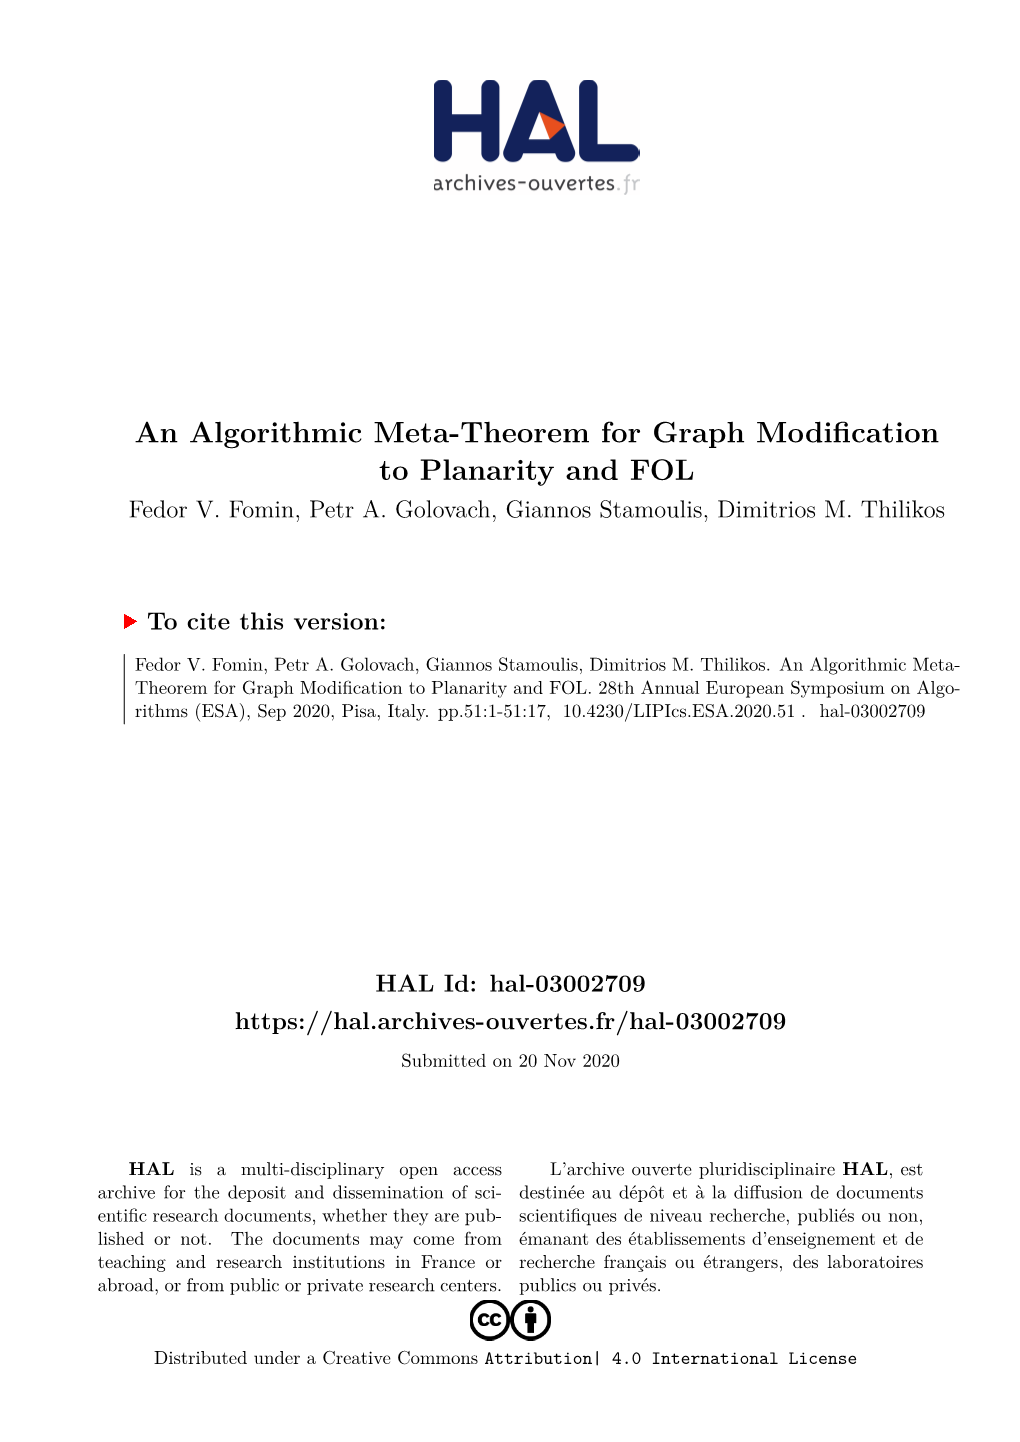 An Algorithmic Meta-Theorem for Graph Modification to Planarity and FOL Fedor V